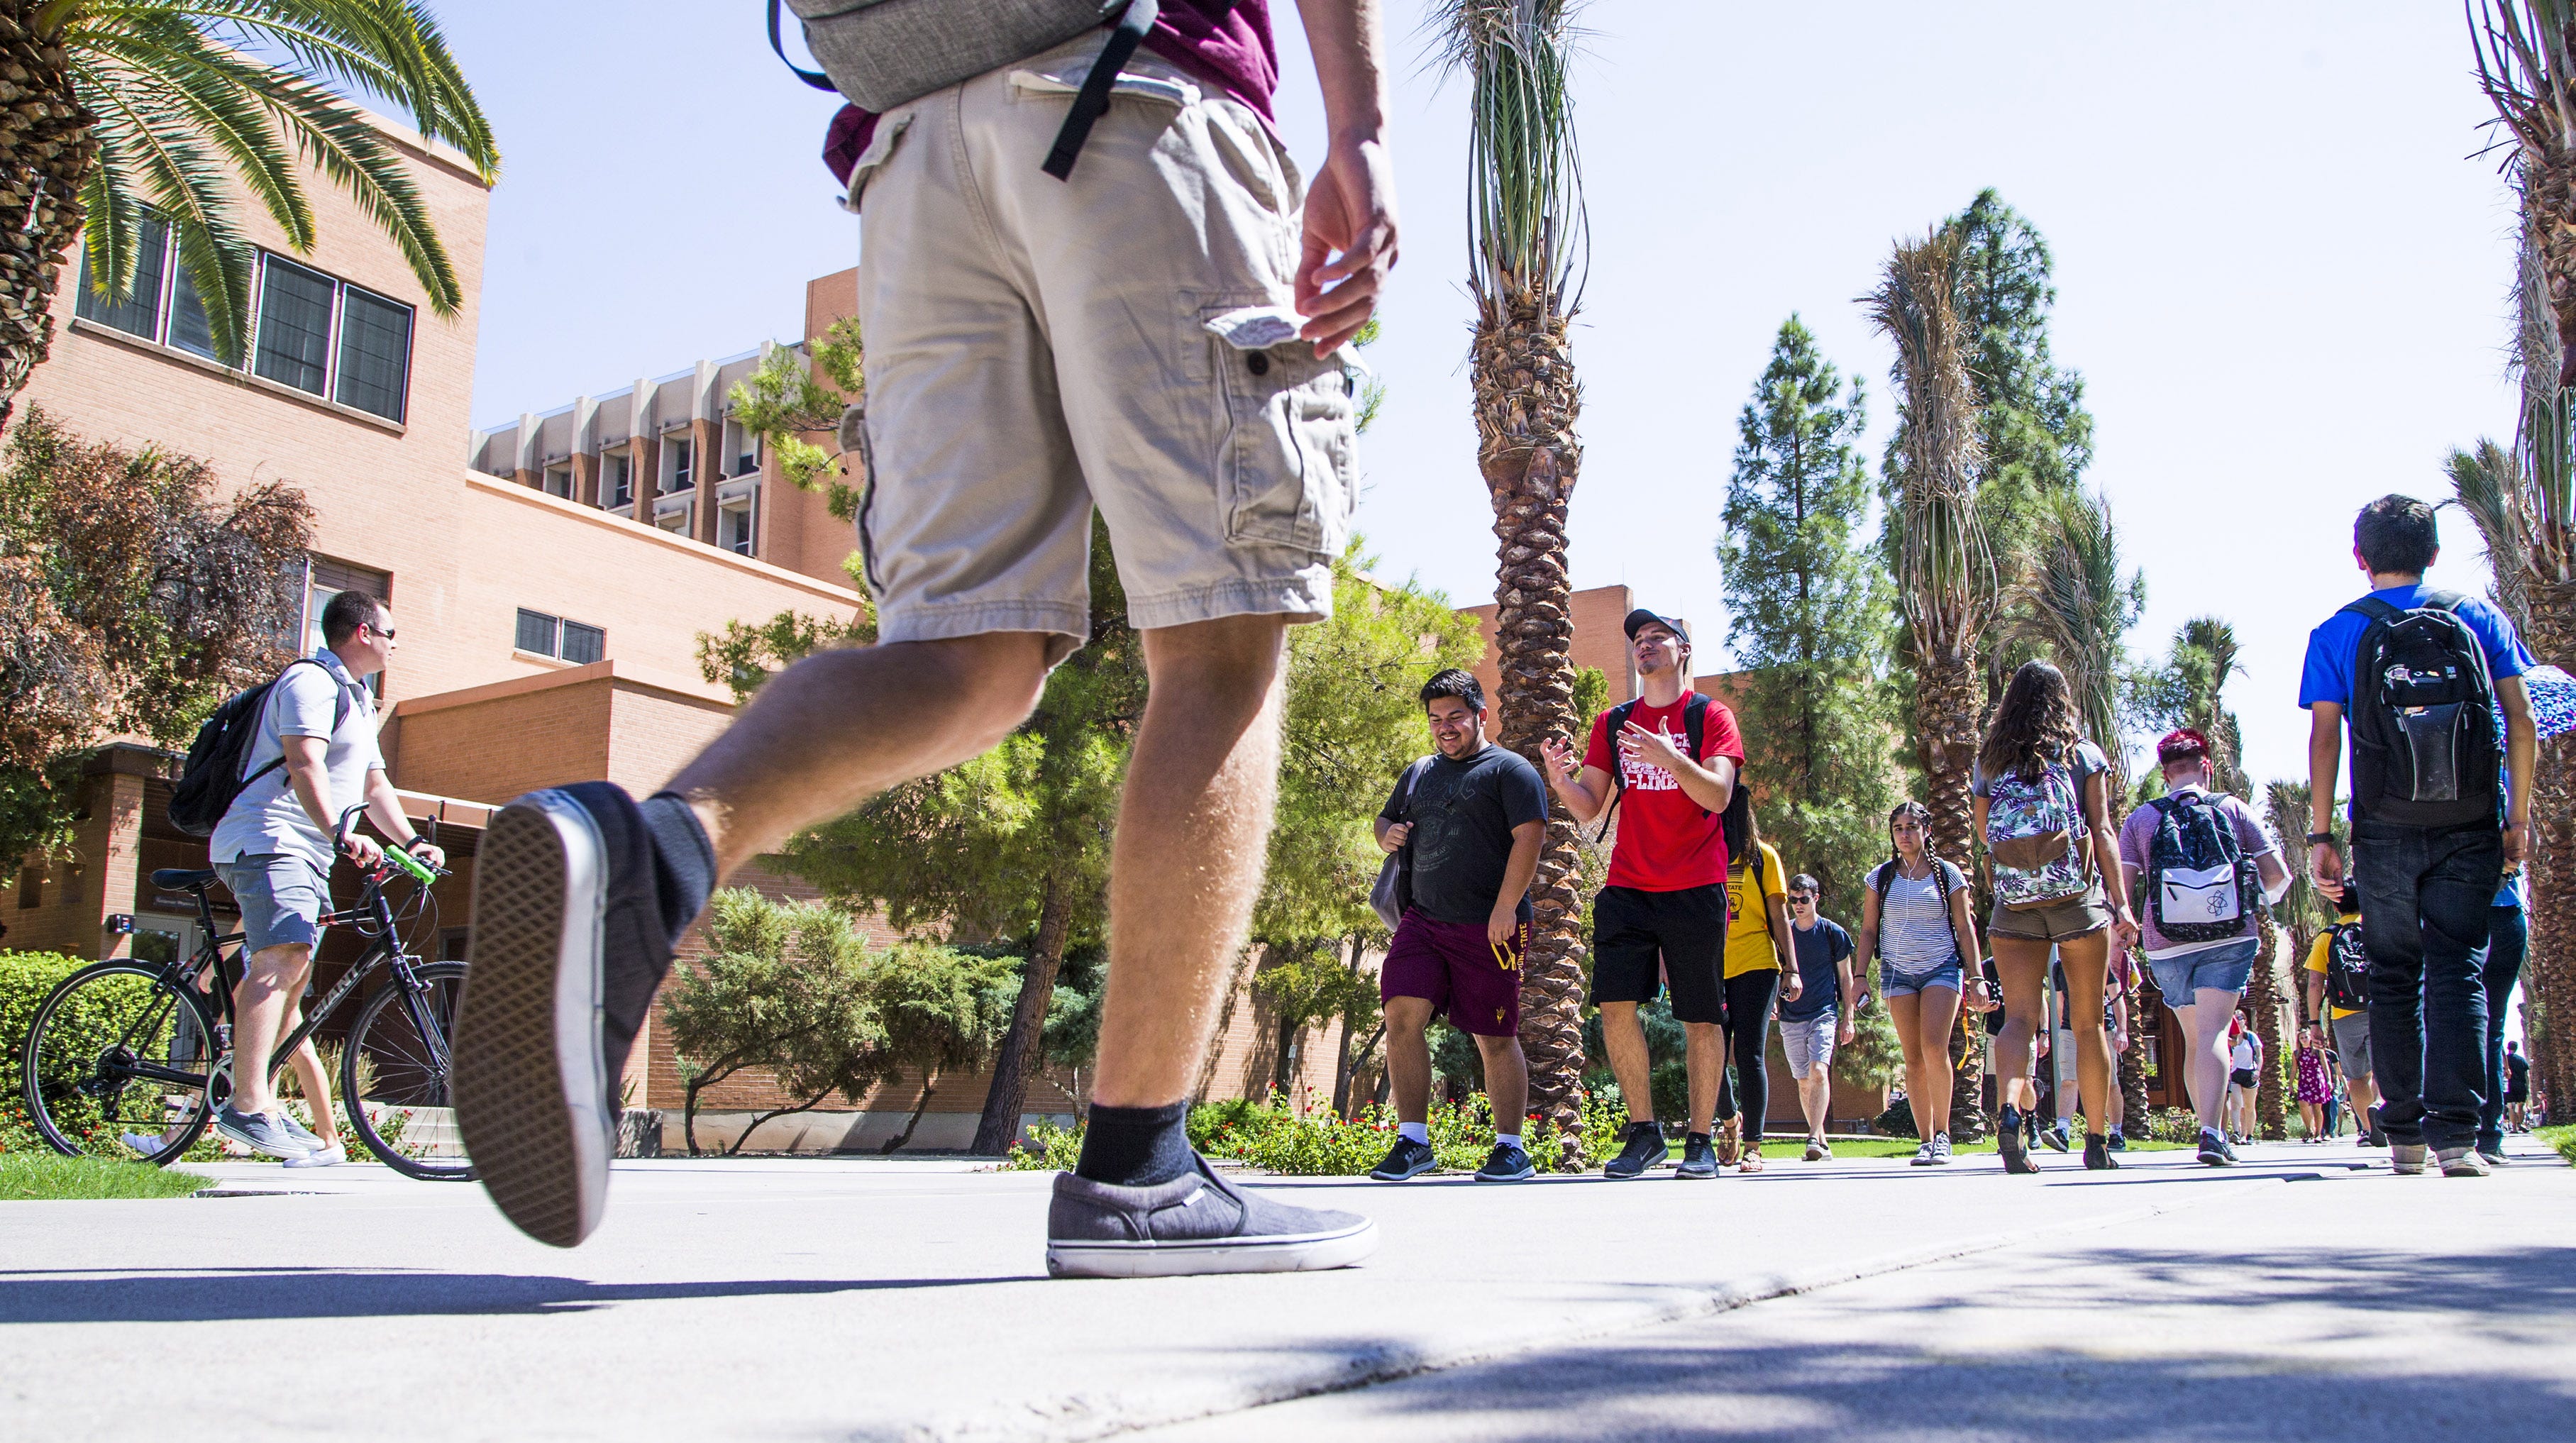 Cost of college: NAU wants to charge $150 to pay for sports programs